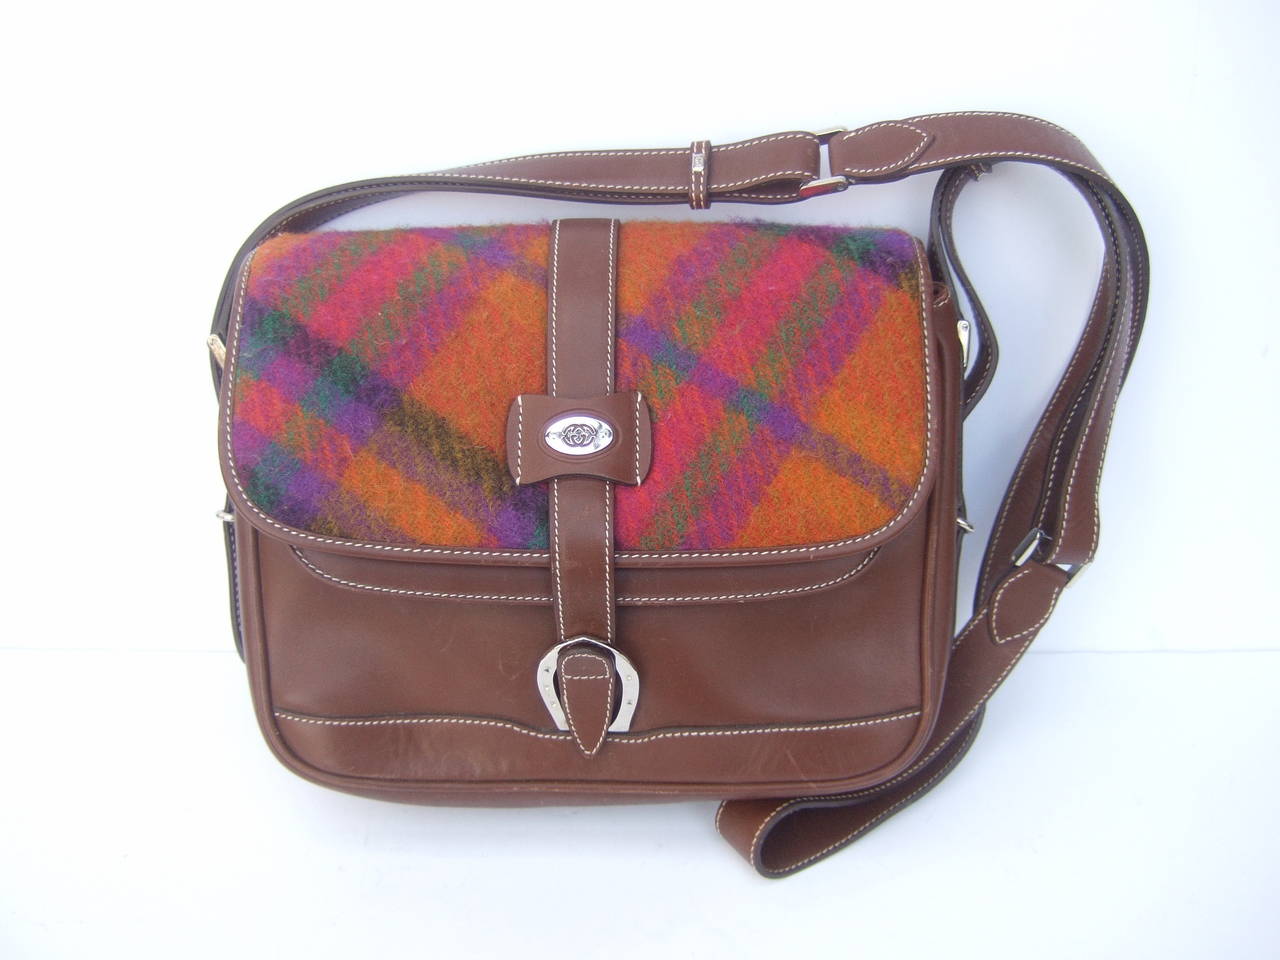 Gucci Italy Rare plaid wool brown leather shoulder bag c 1980s
The unique saddle style handbag is designed with a multicolor plaid wool flap cover. The center of the front cover has a silver metal designer plate
with Gucci's interlocked